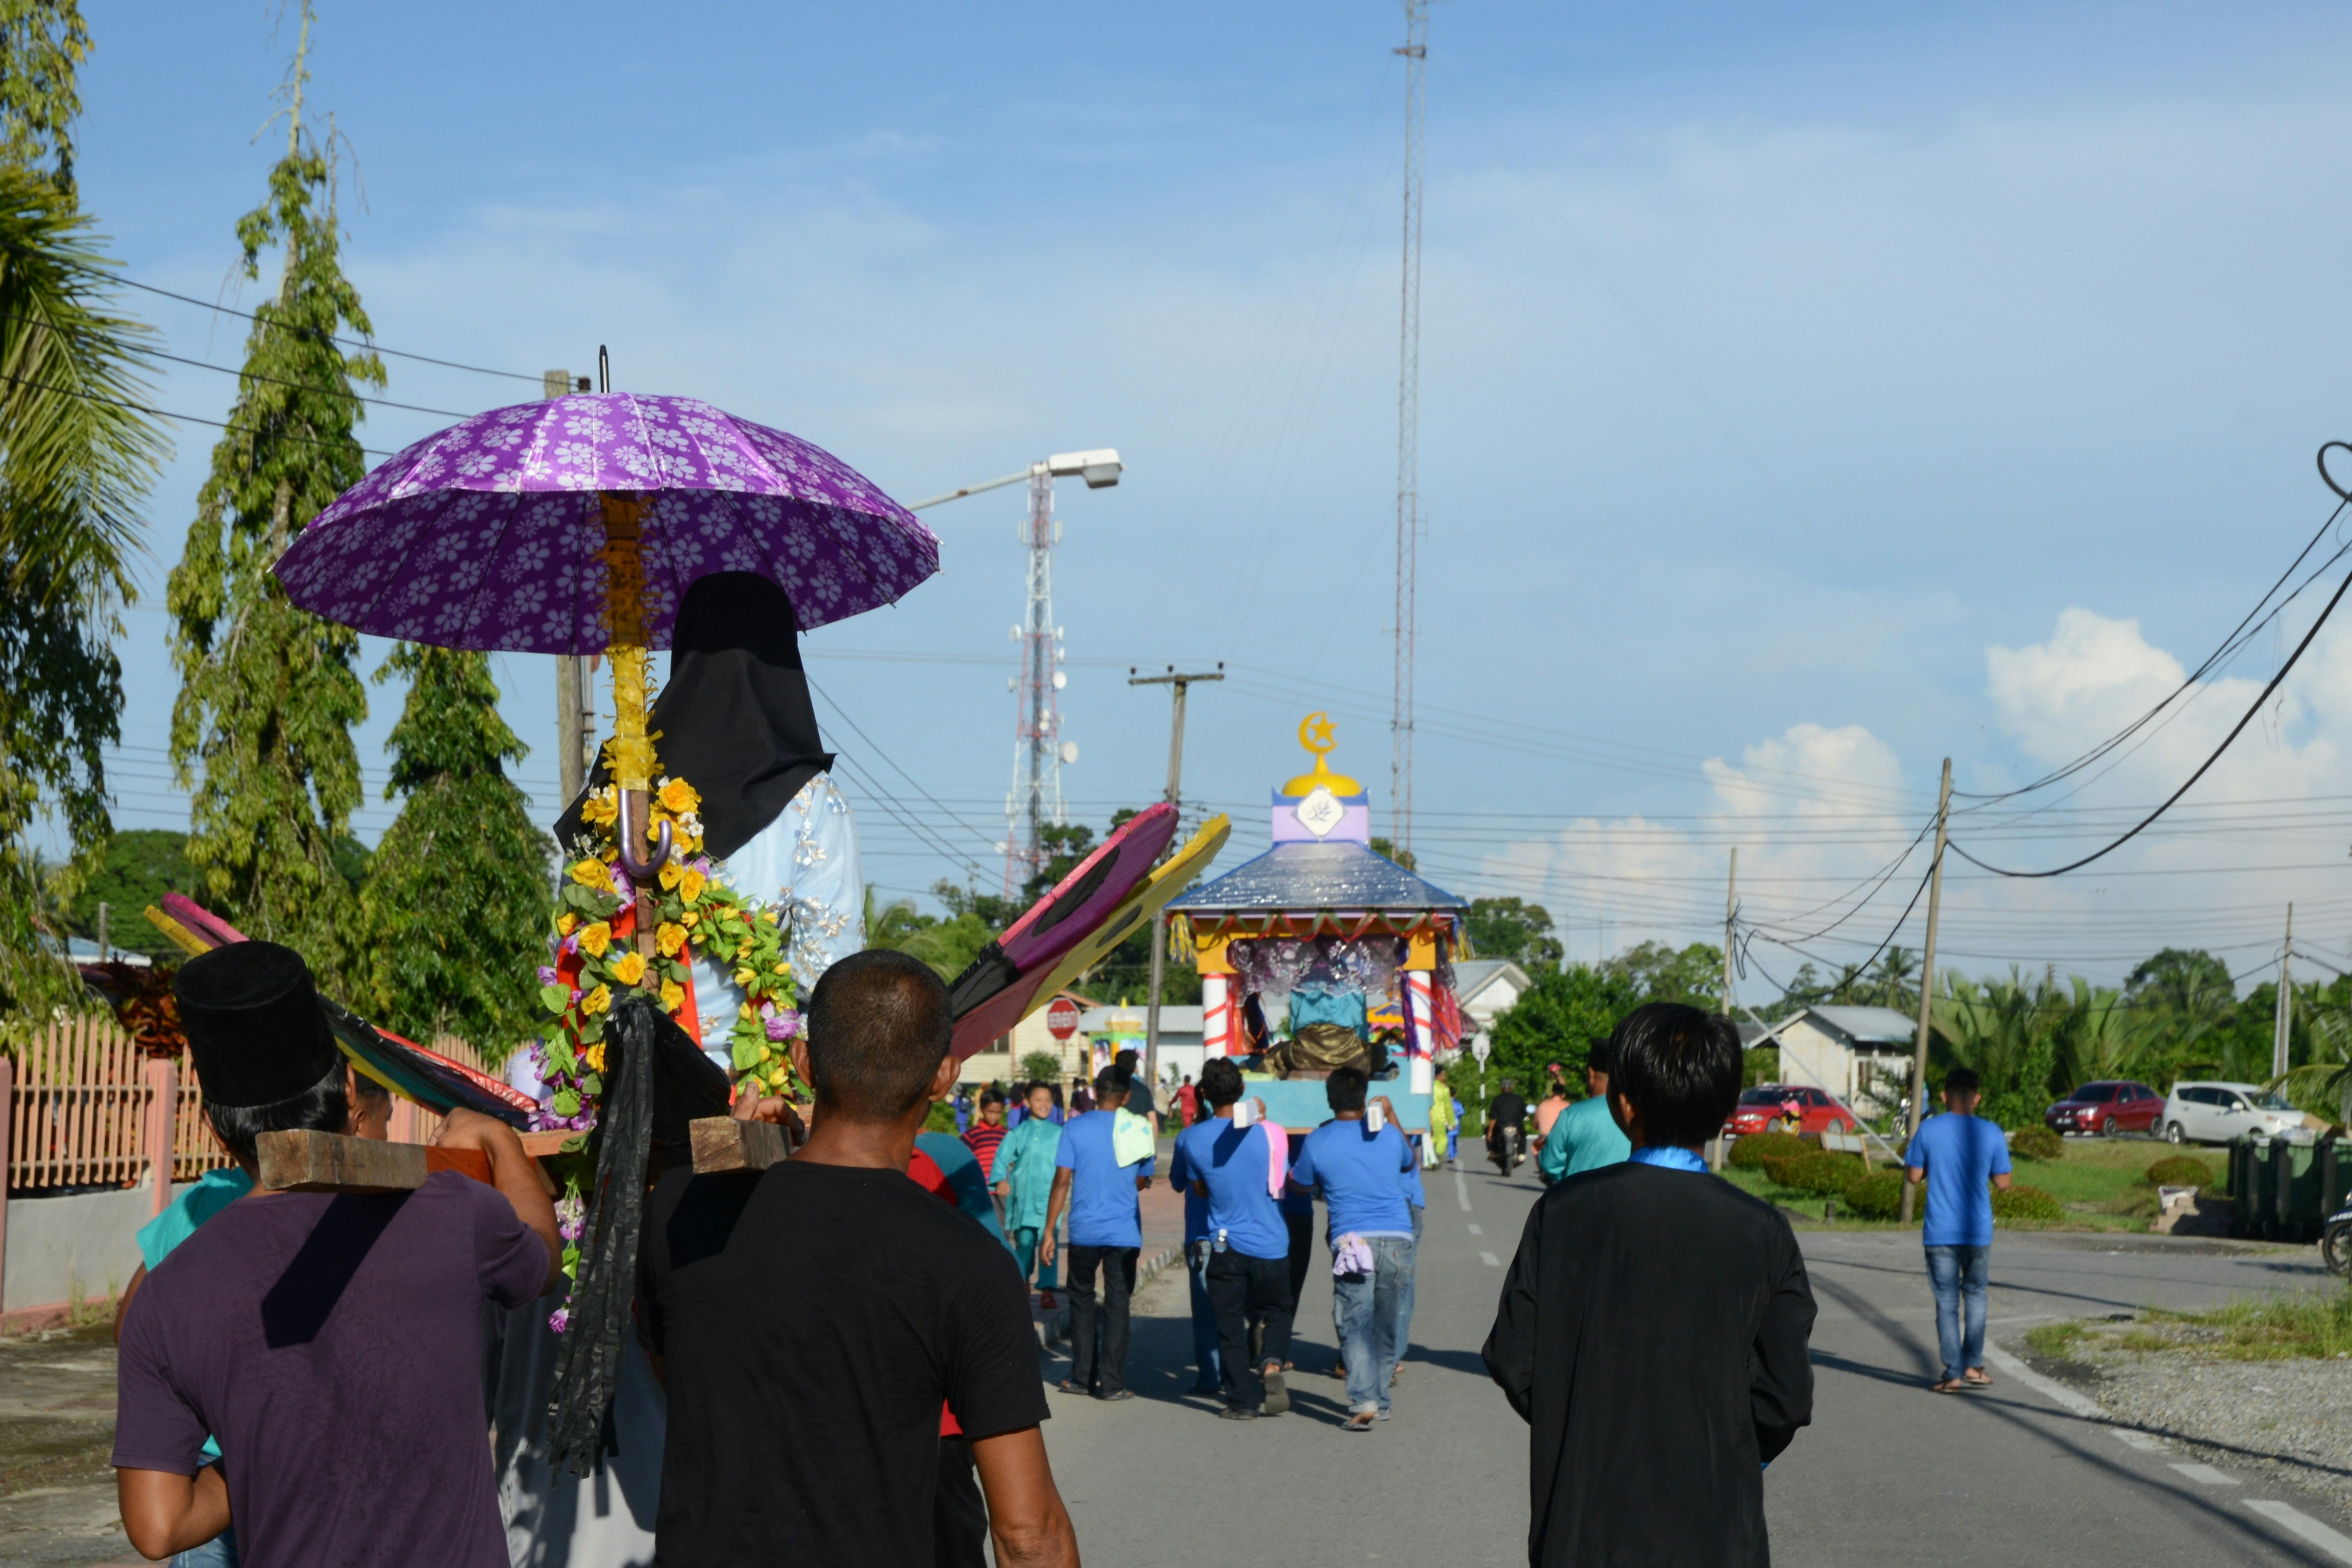 A group of people march in the khatamal Al-Quaran parade. There is a figure in an usungan under a purple umbrella.